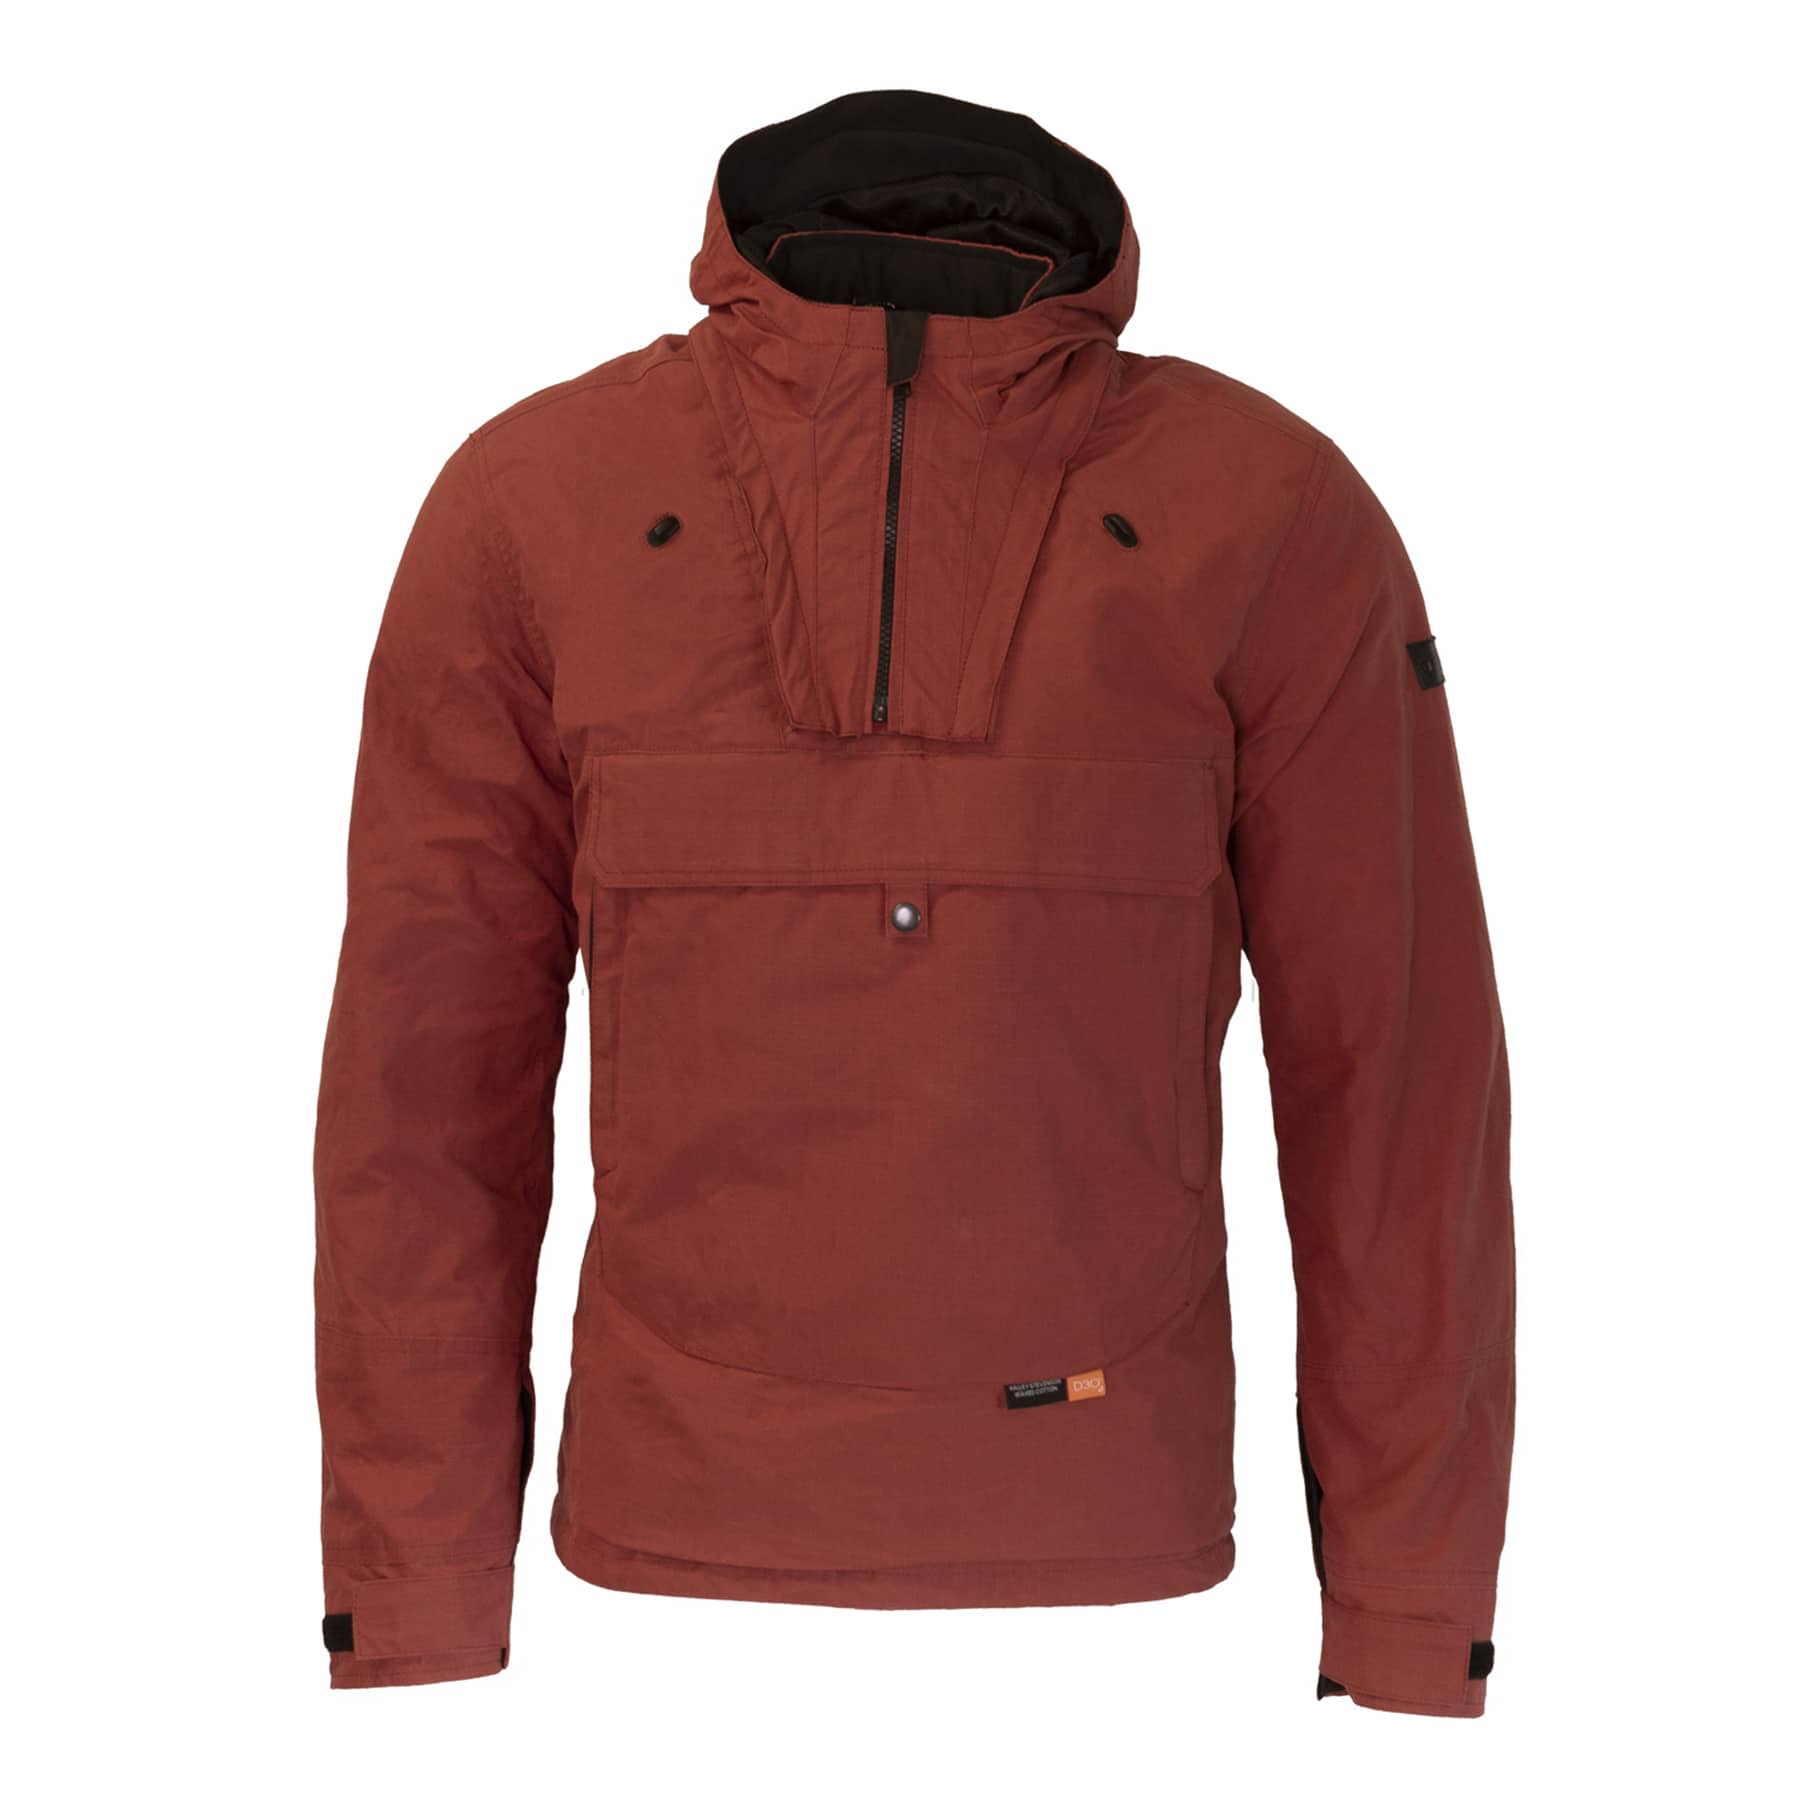 Outlaw Smock Ochre Front